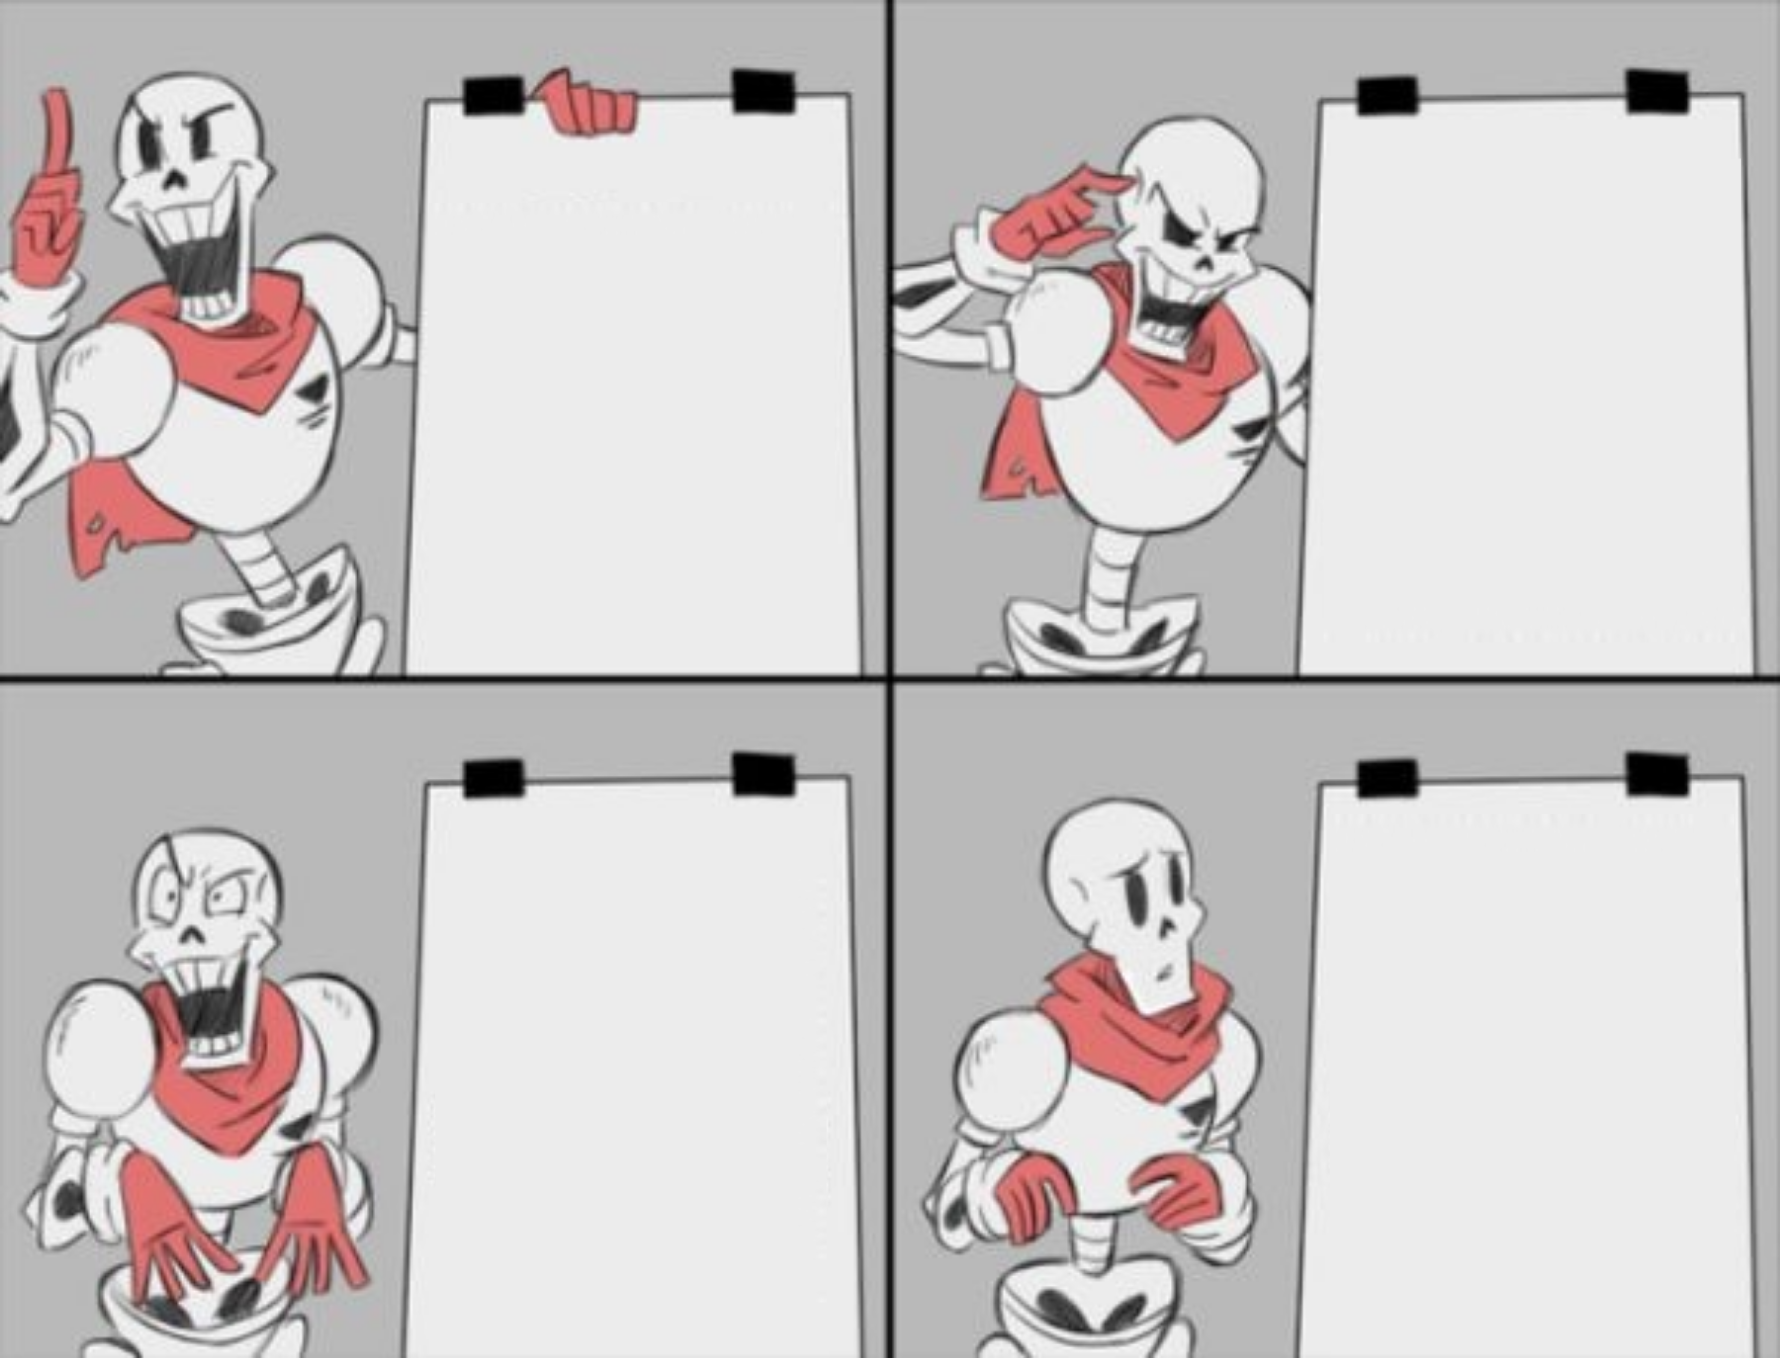 High Quality Papyrus presents his idea Blank Meme Template